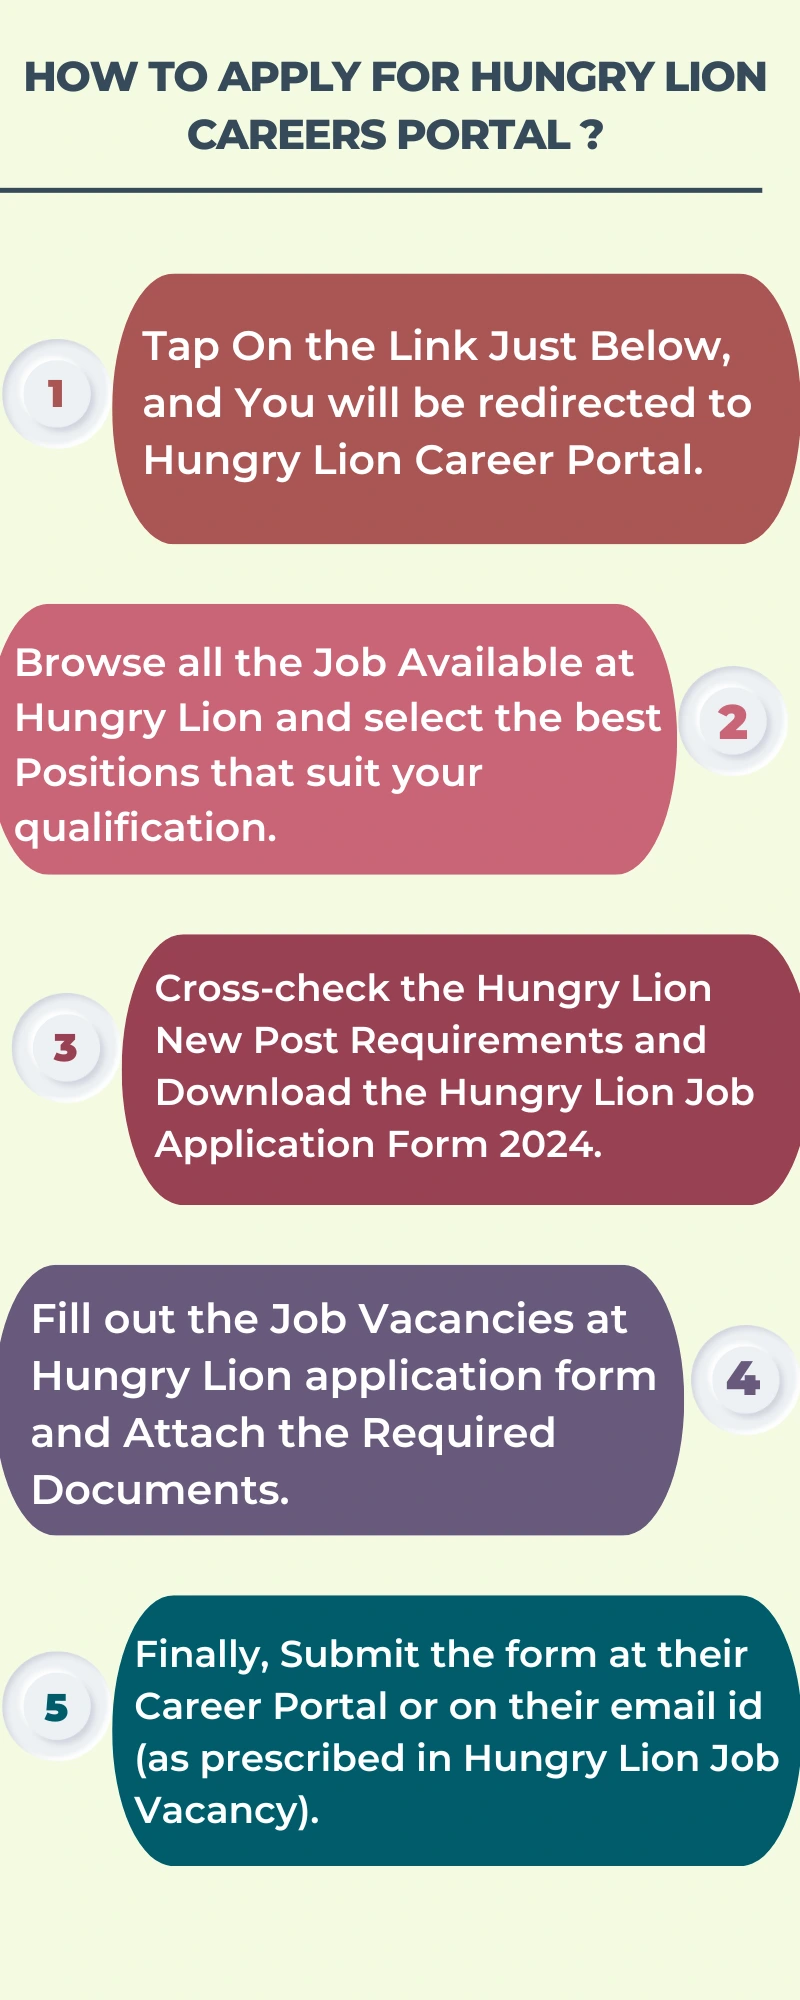 How To Apply for Hungry Lion Careers Portal ?